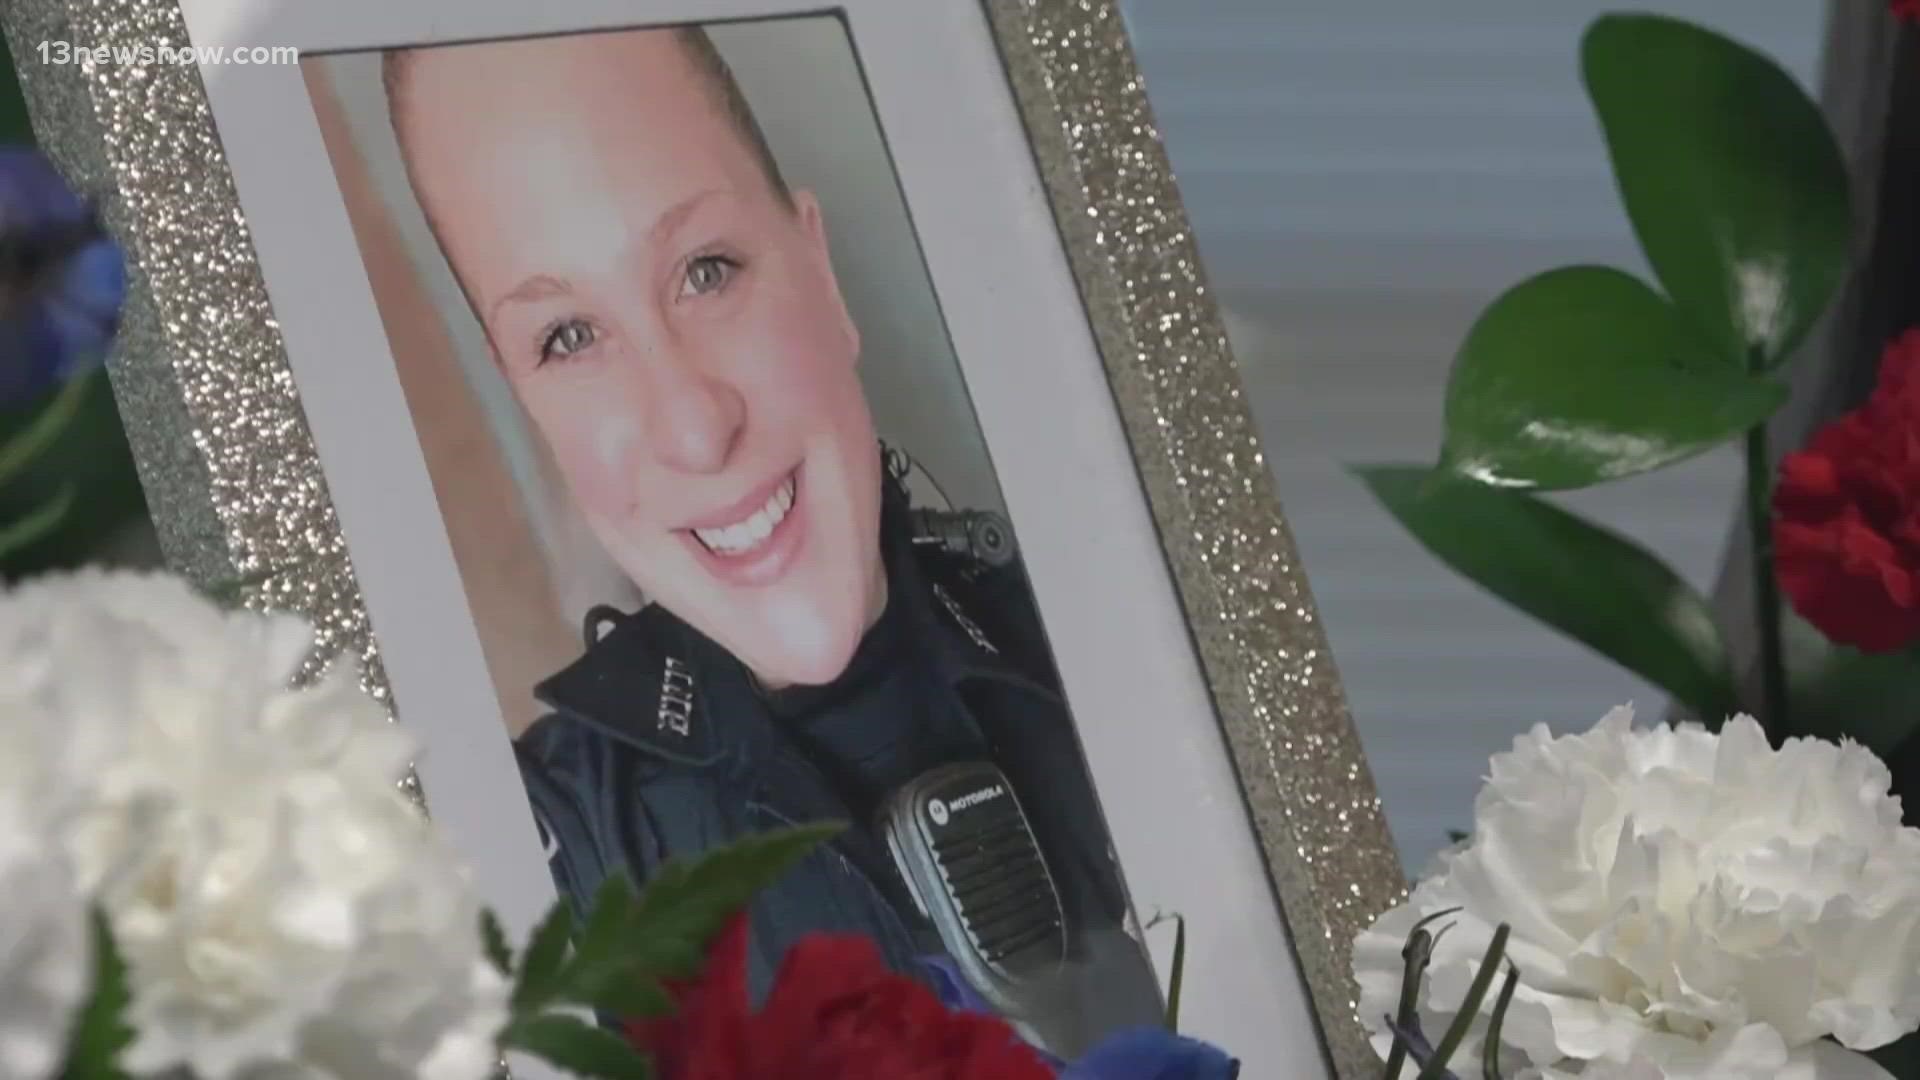 Officer Thyne was killed in 2020 in the line of duty. Two years later, her family says her smile will live on forever.